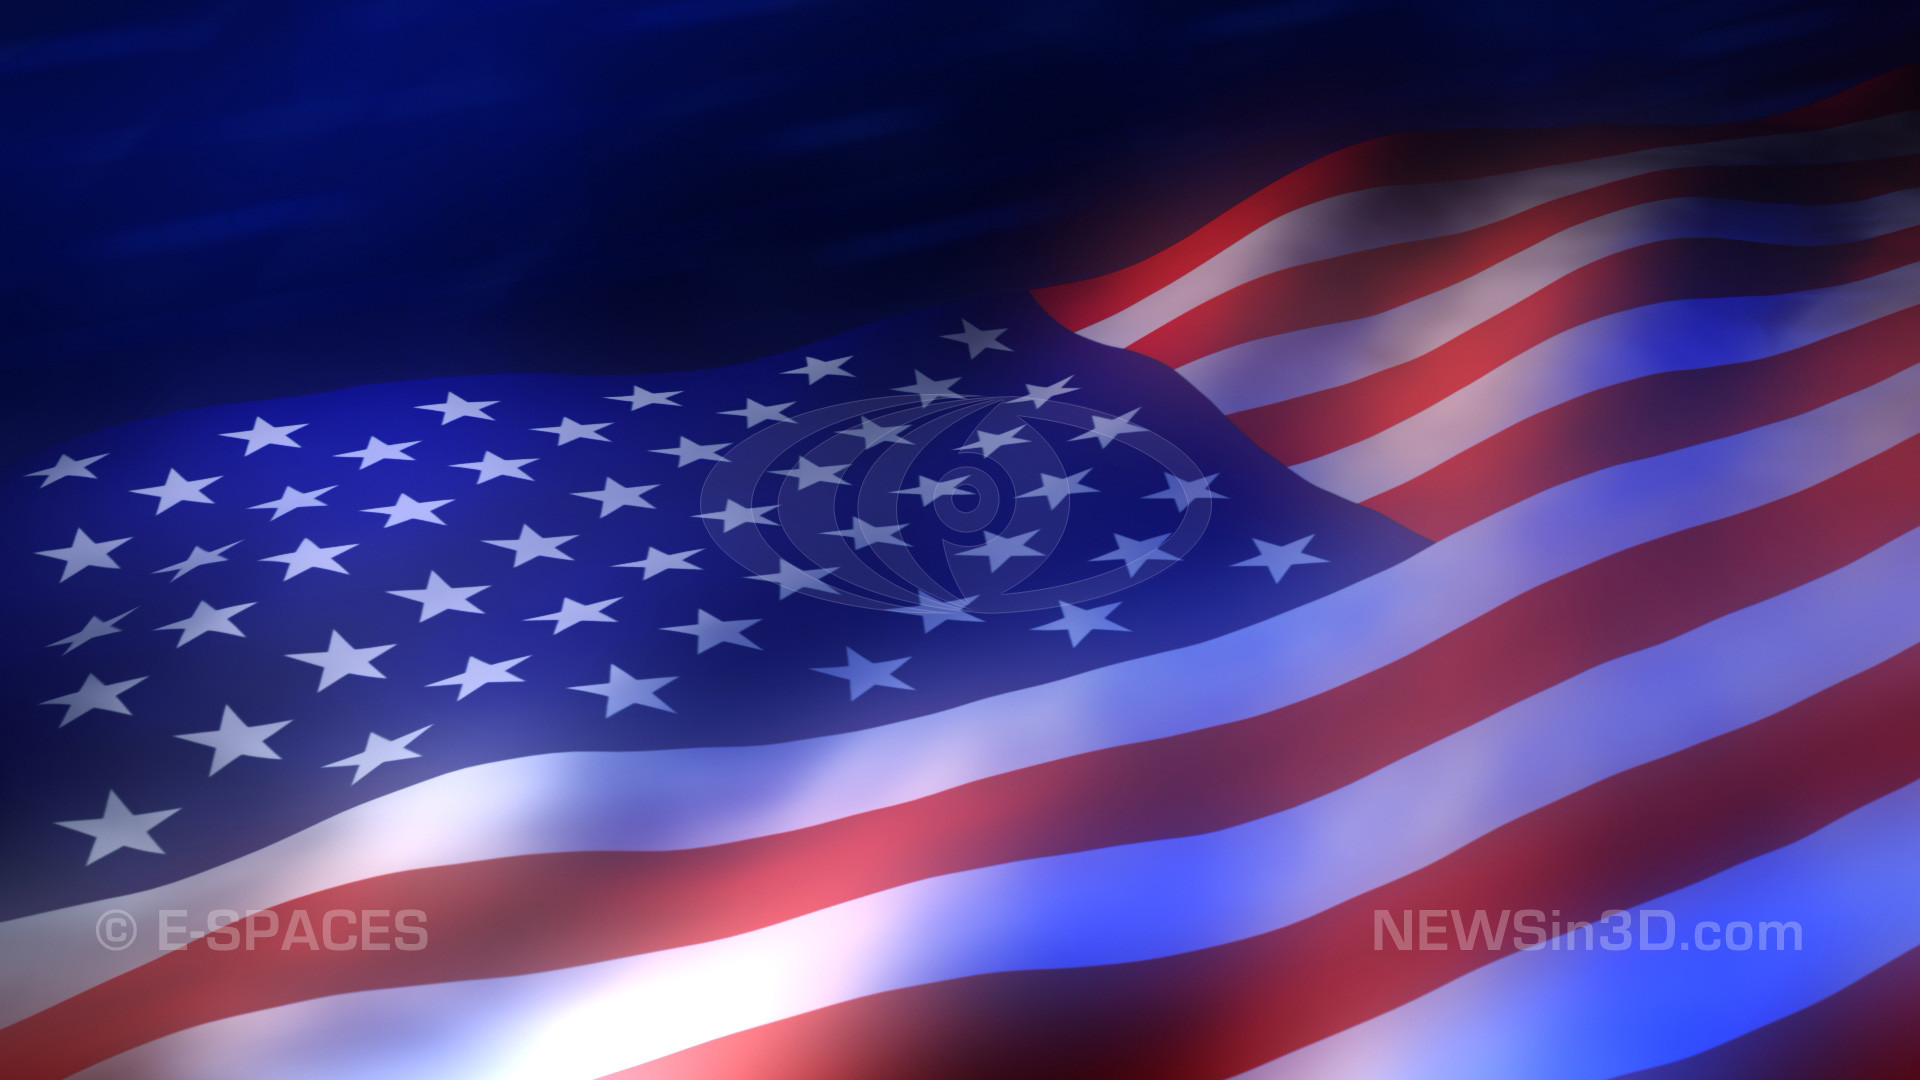 1920x1080 American flag animated background